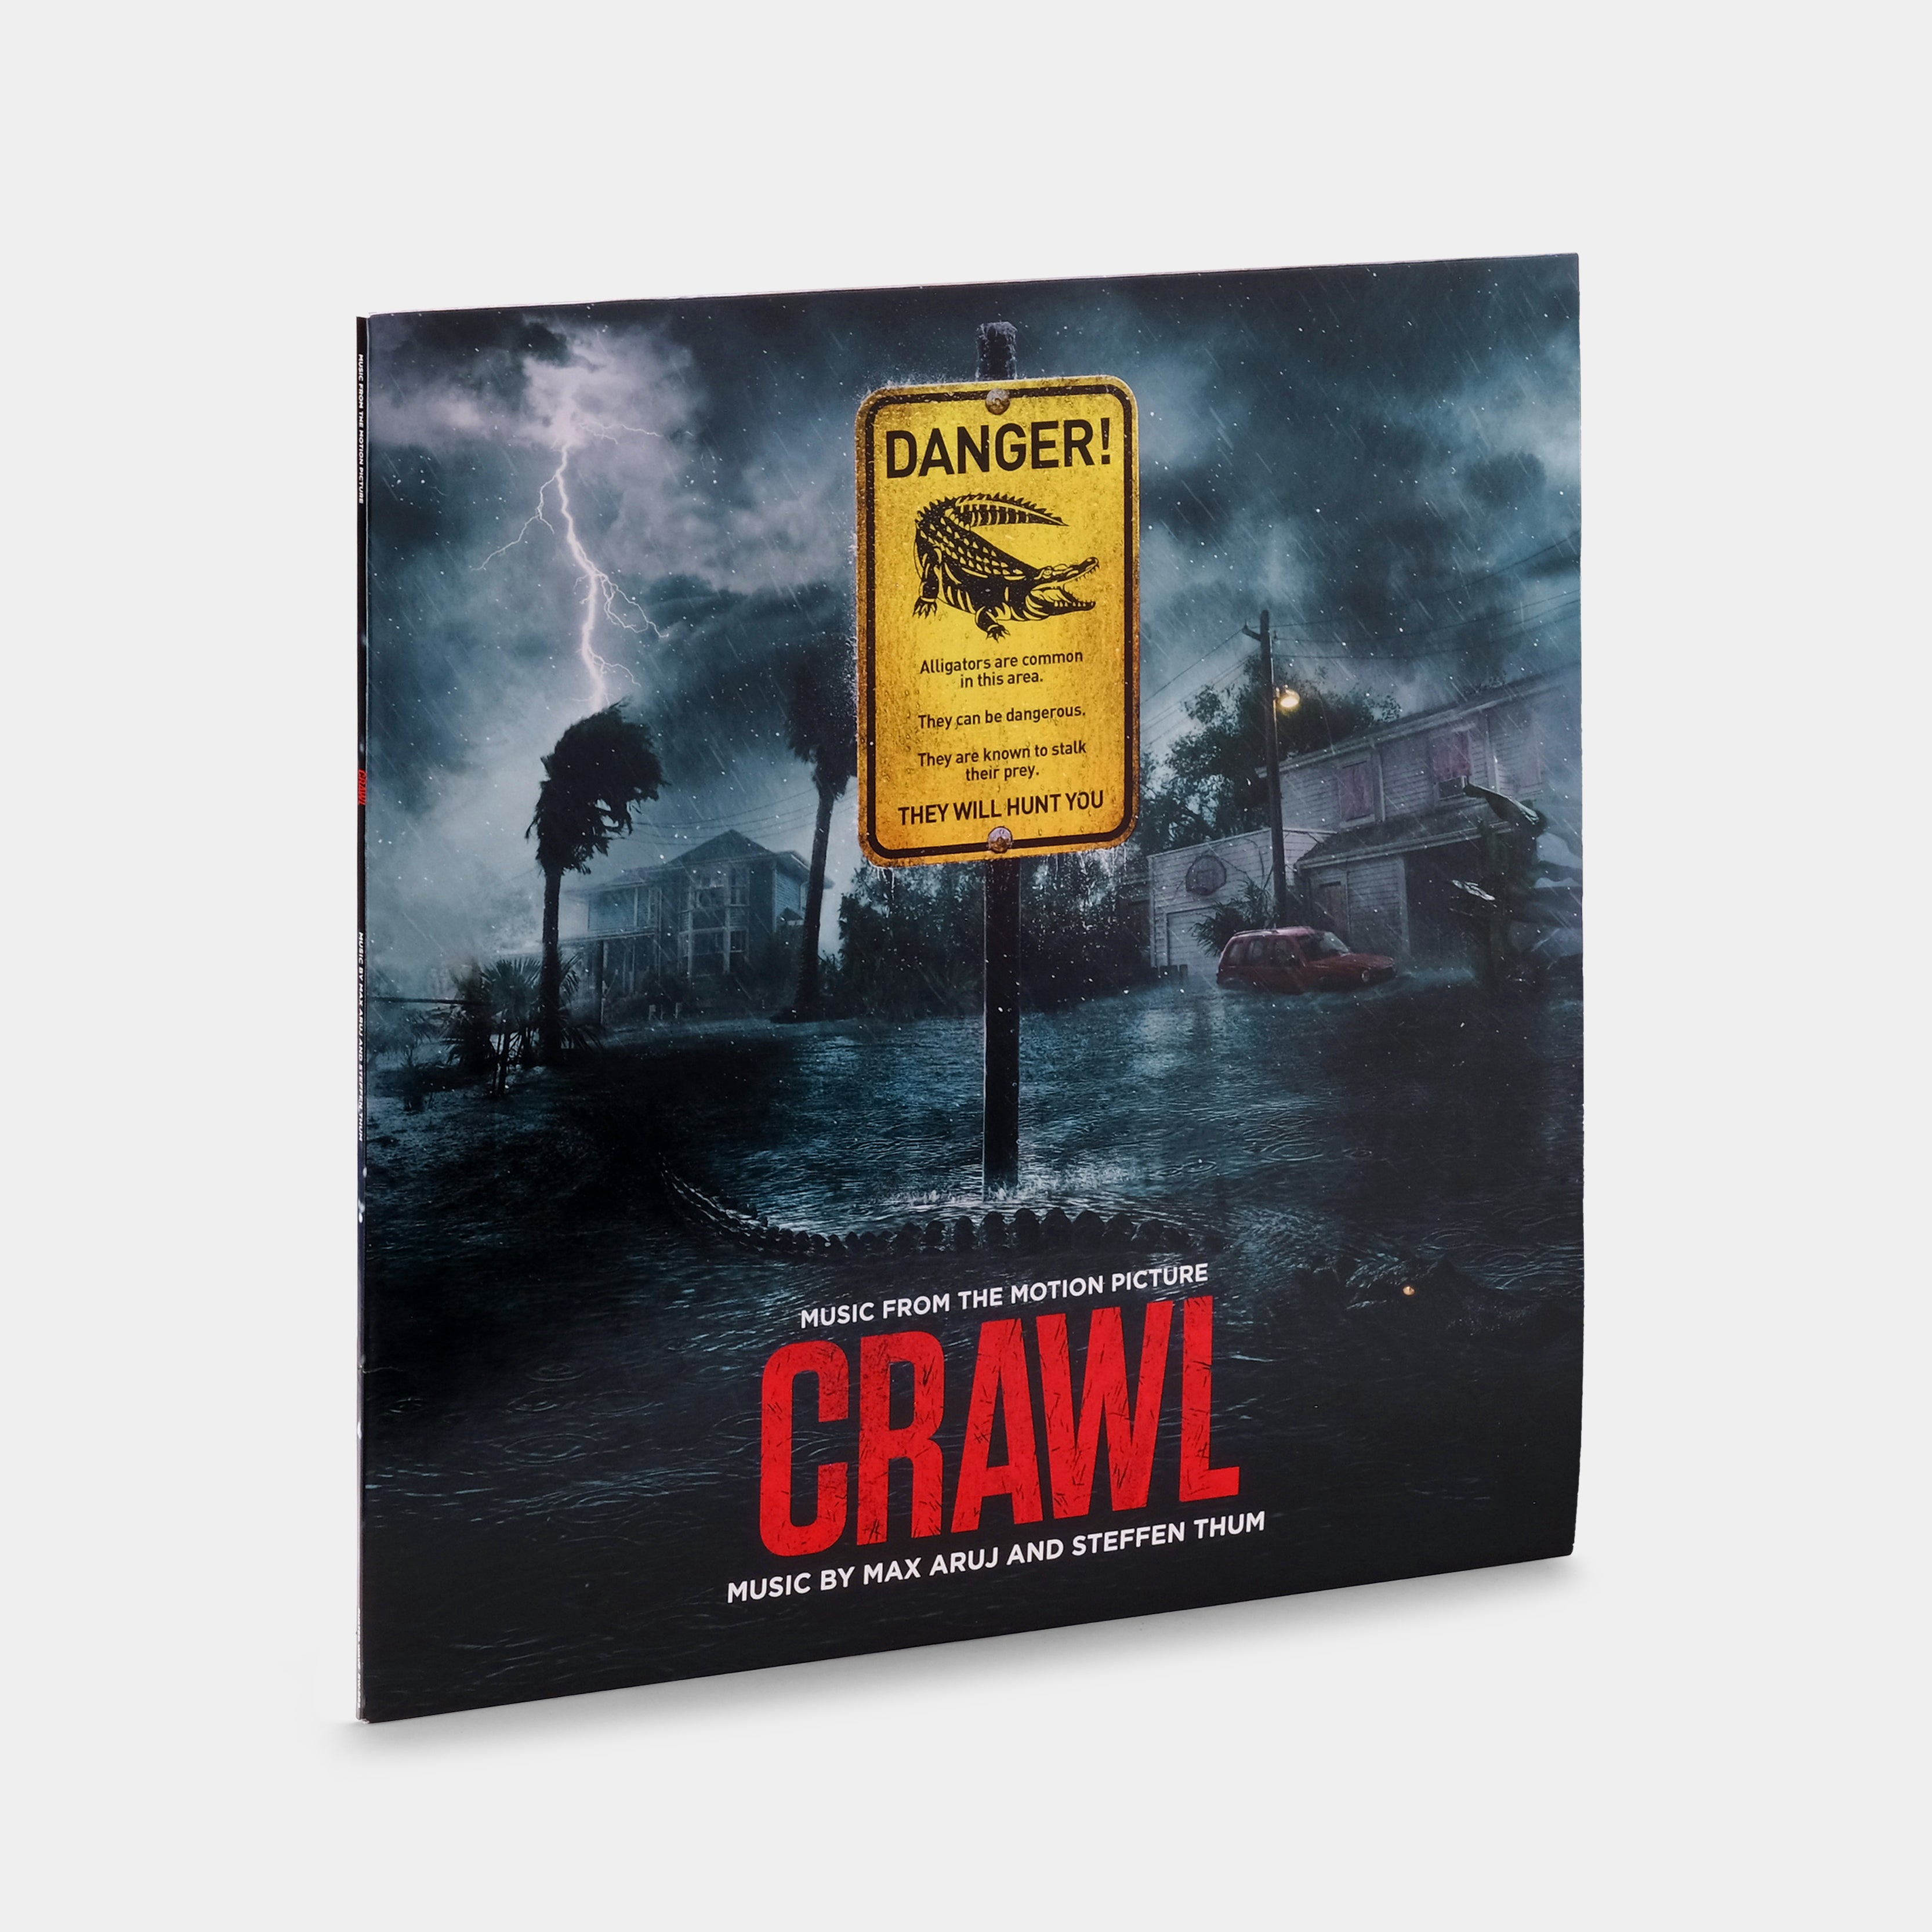 Max Aruj And Steffen Thum - Crawl (Music From The Motion Picture) LP Vinyl Record